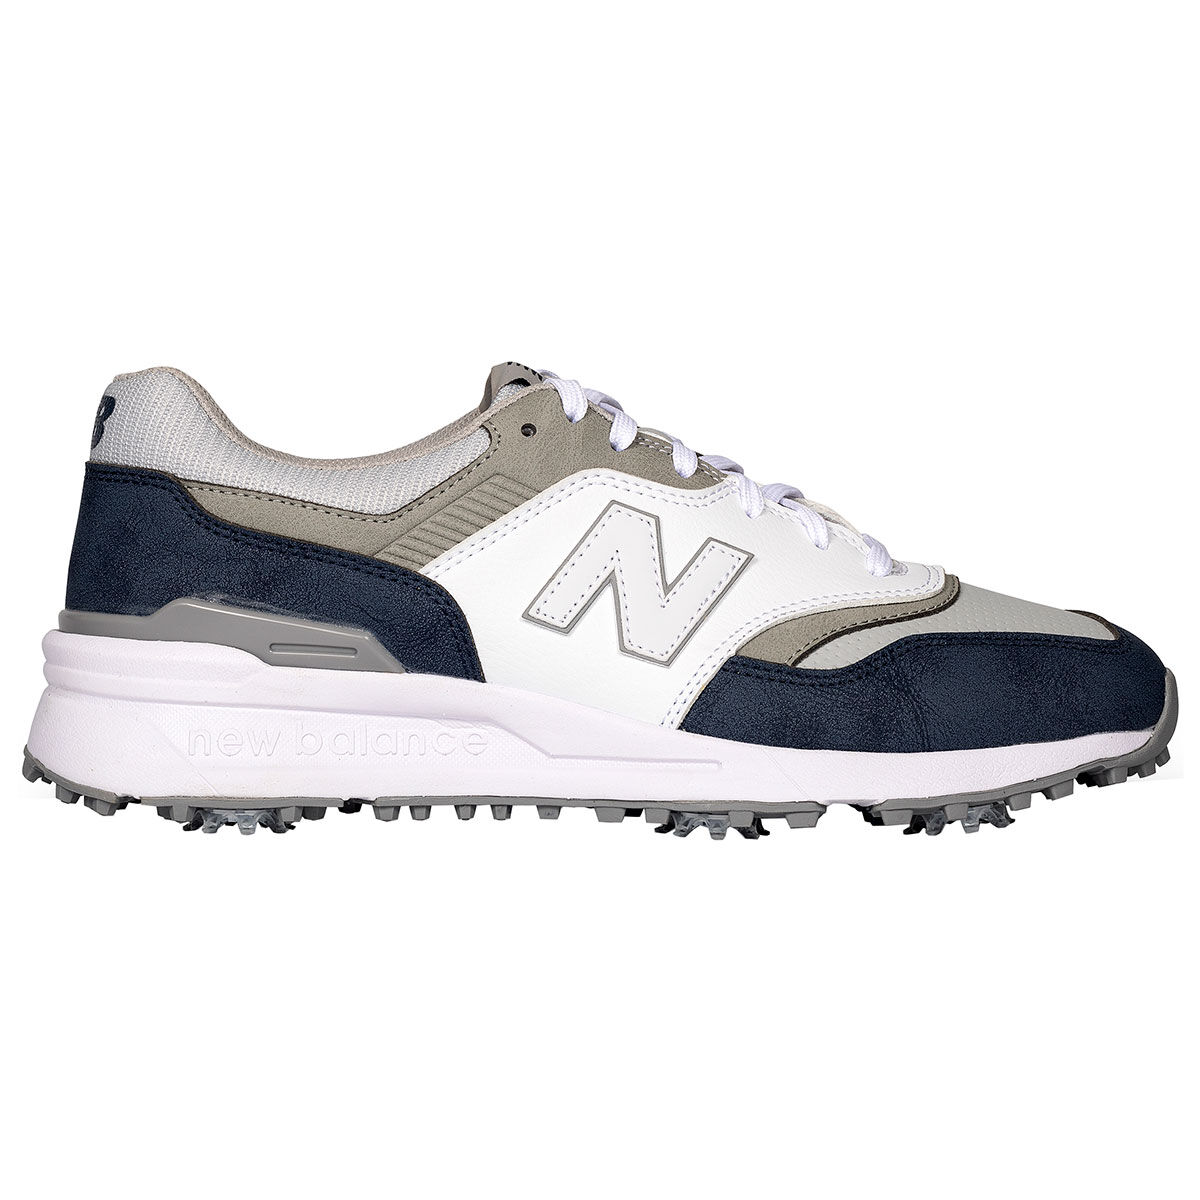 New Balance Men’s 997 Waterproof Spiked Golf Shoes, Mens, Navy/white, 9 | American Golf